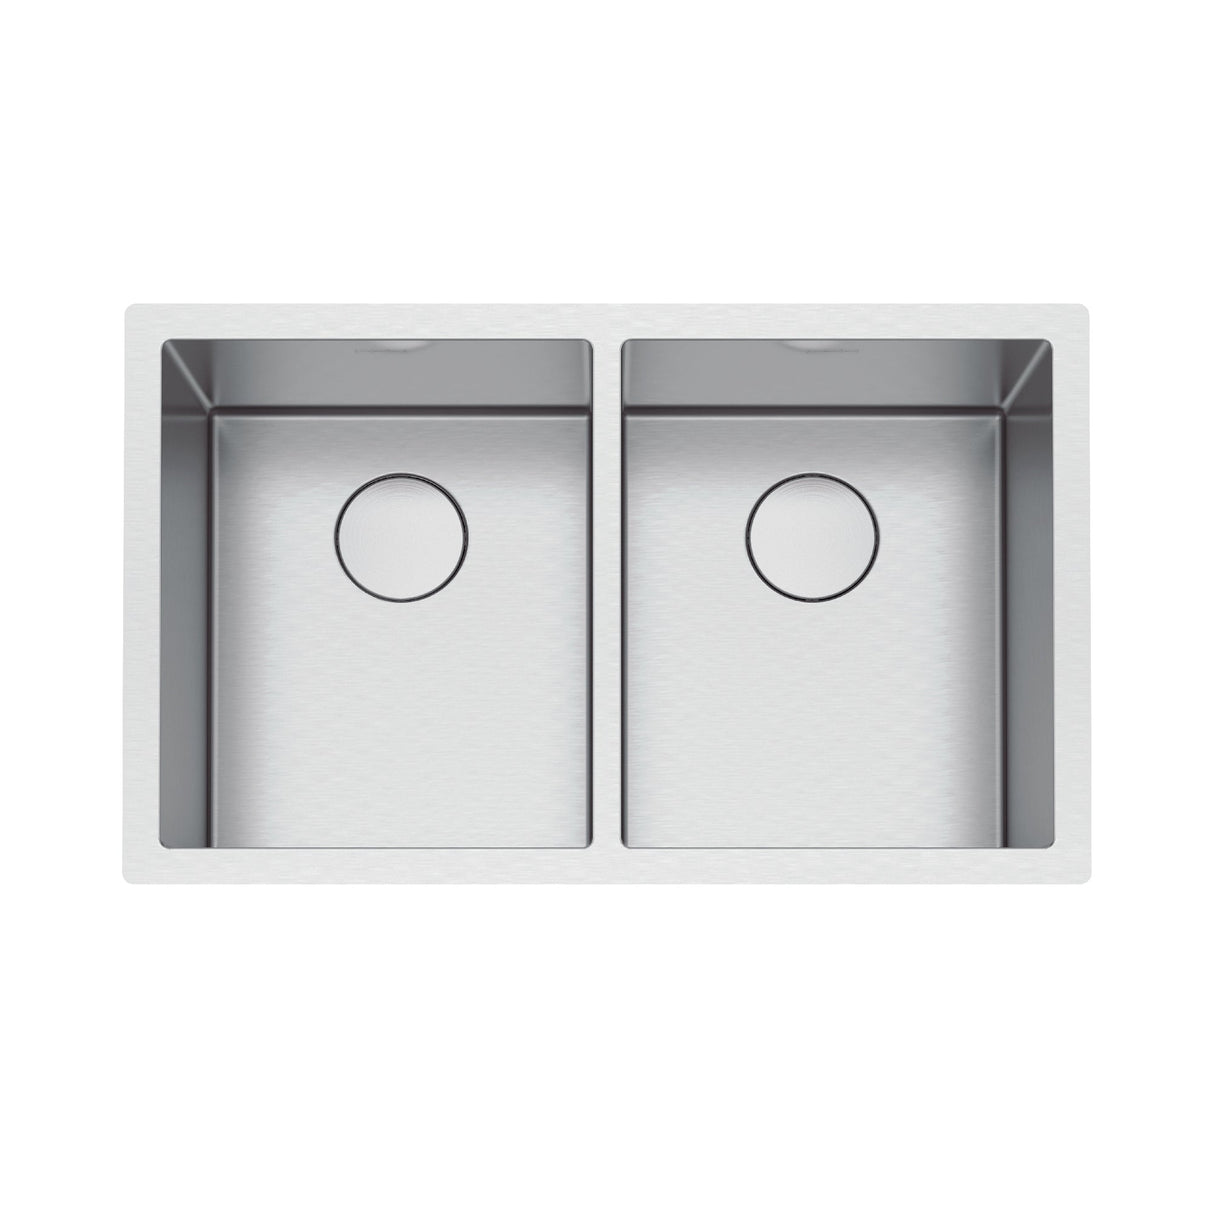 FRANKE PS2X120-14-14 Professional 2.0 31.5-in. x 19.5-in. 16 Gauge Stainless Steel Undermount Double Bowl Kitchen Sink - PS2X120-14-14 In Diamond